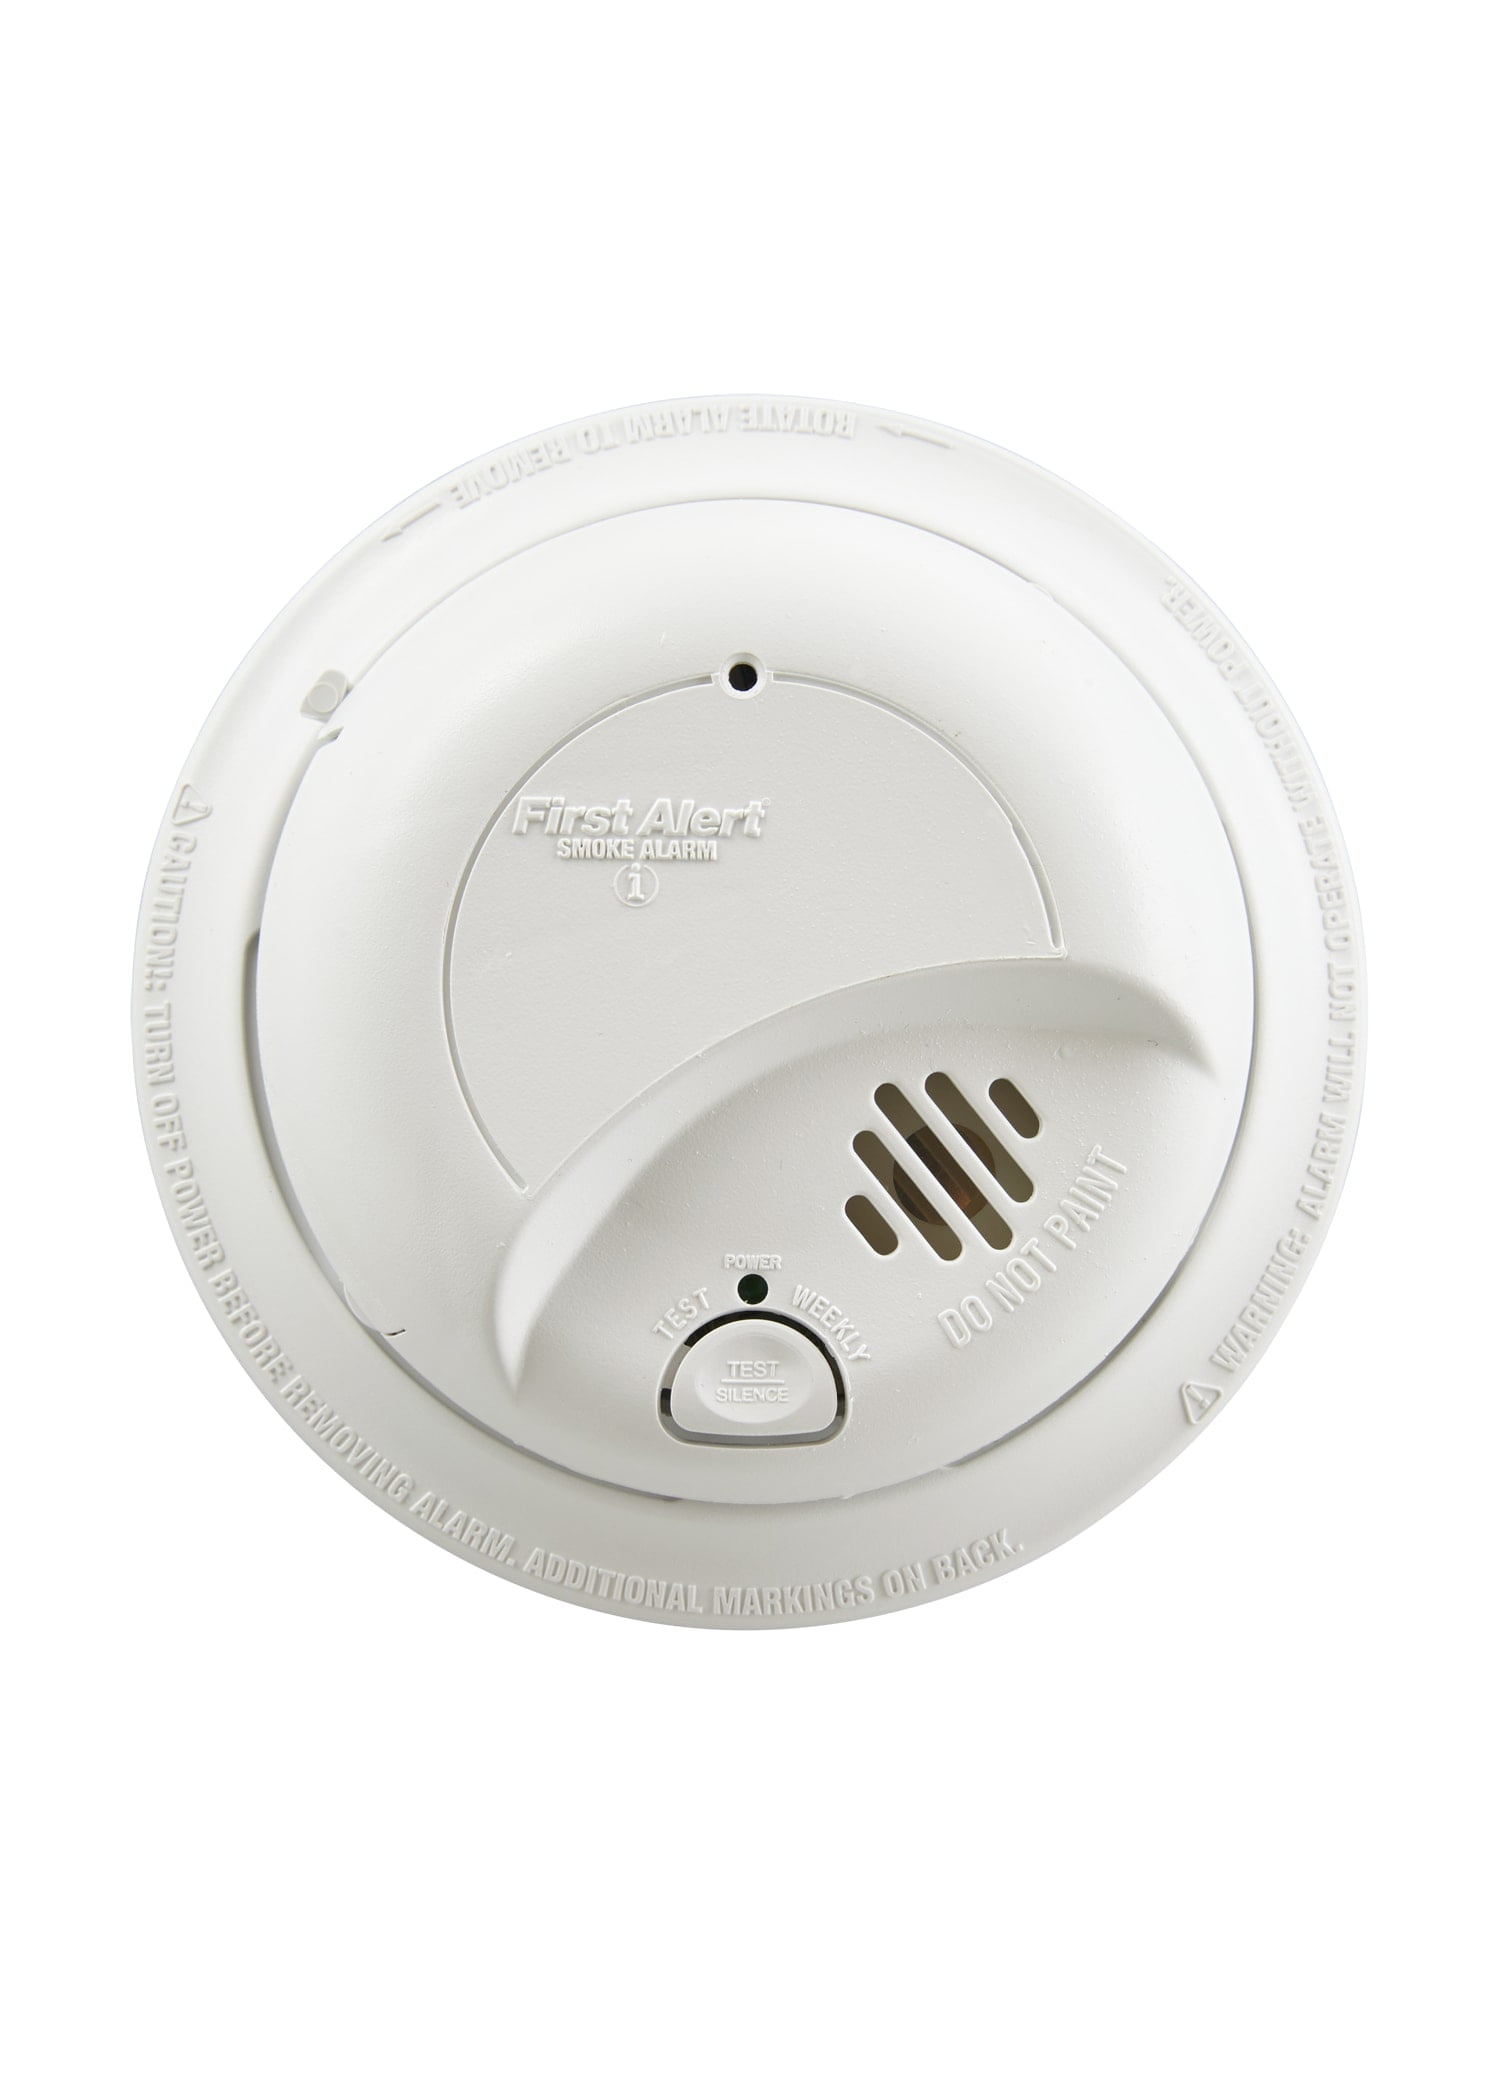 6 Pack for sale online First Alert 9120B6CP Smoke Alarm 